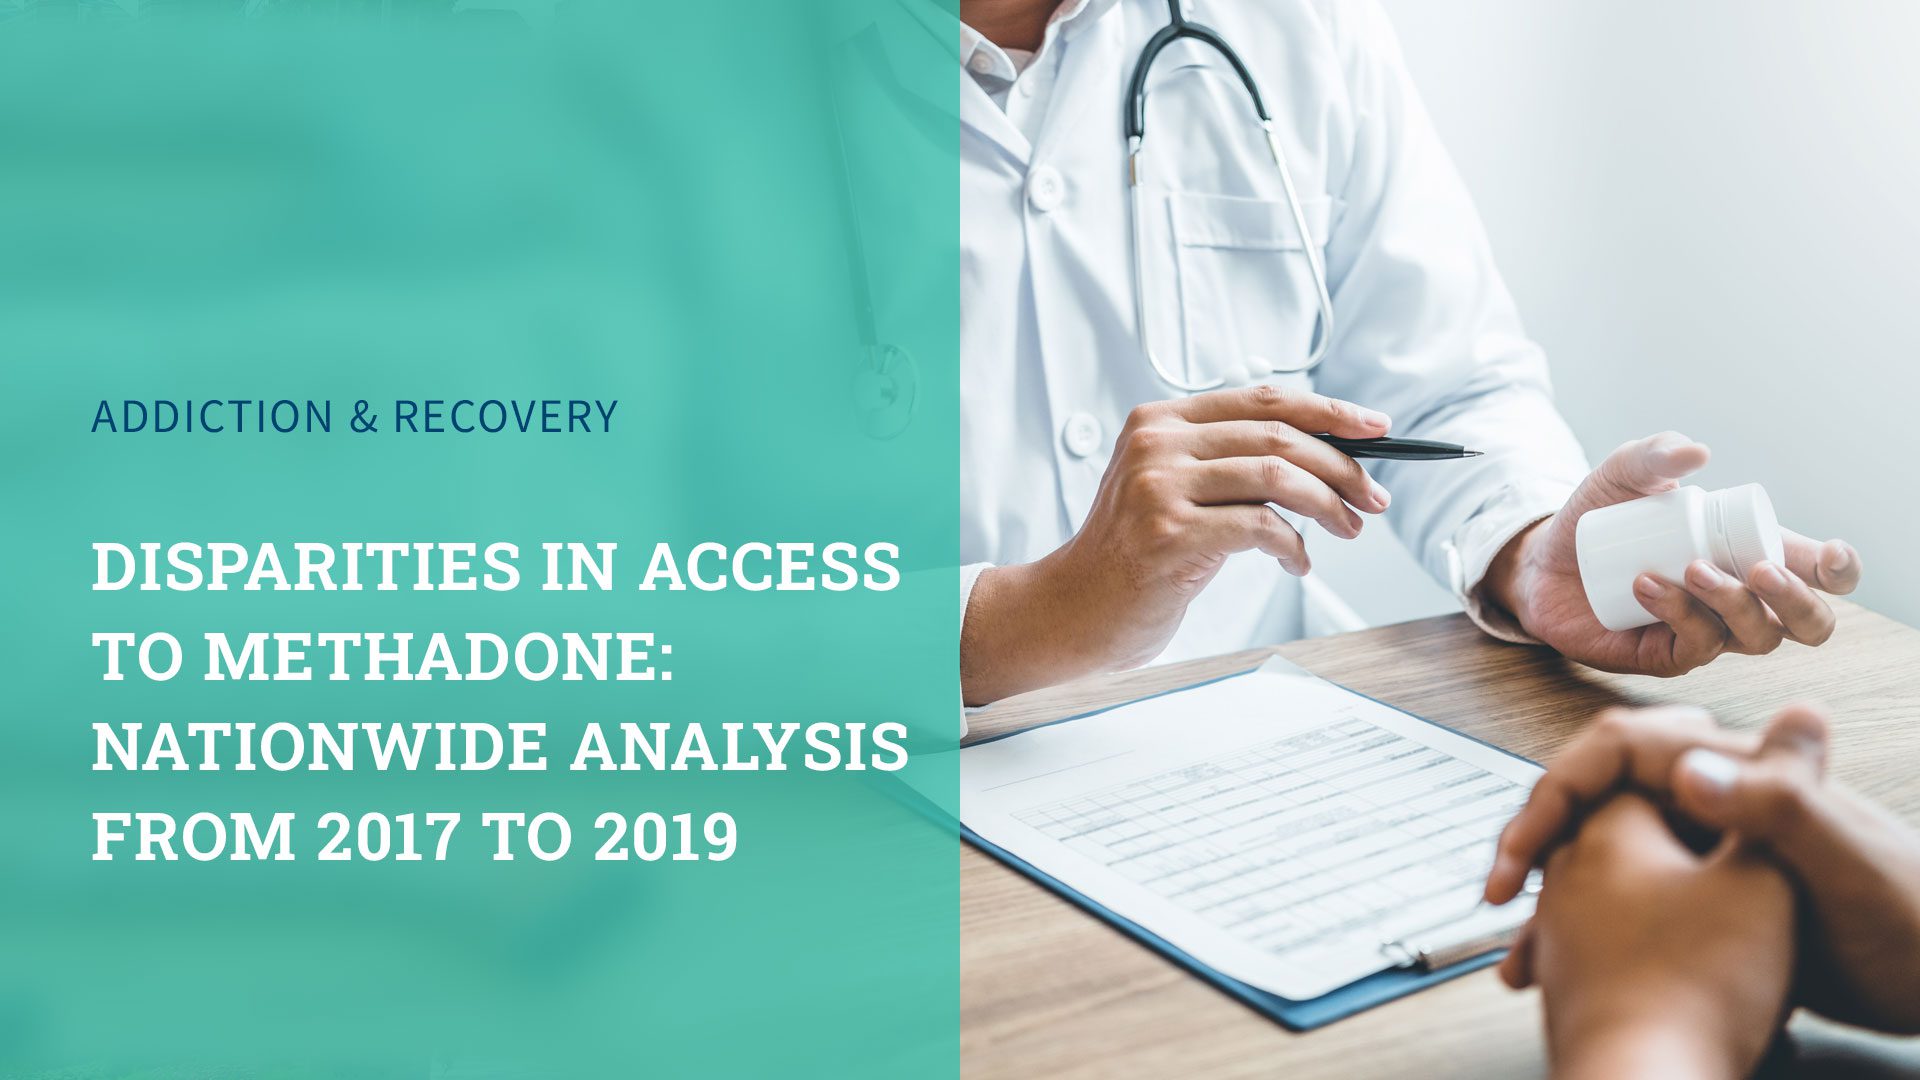 Disparities in Access to Methadone: Nationwide Analysis 2017-2019